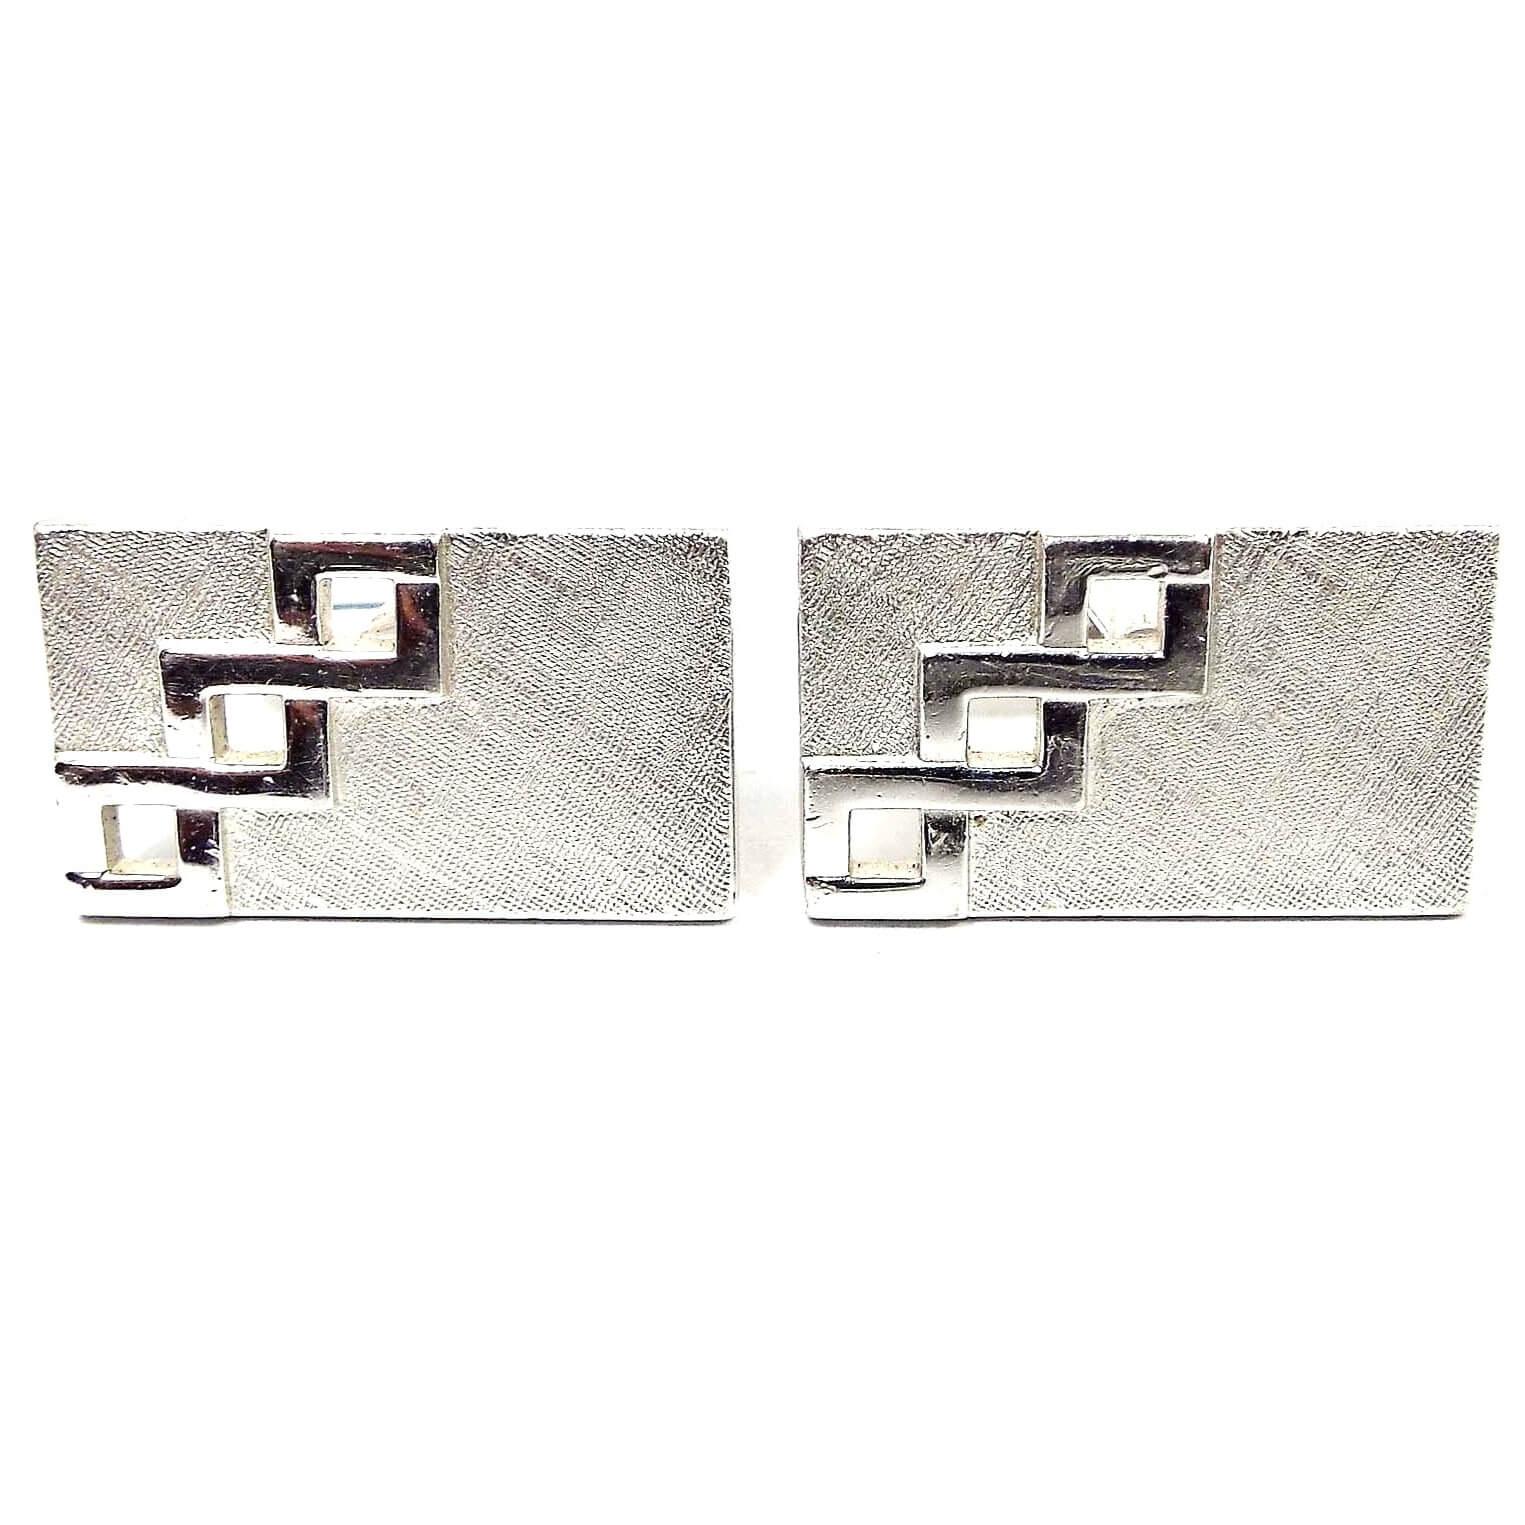 Front view of the Mid Century vintage Swank cut out cufflinks. They are rectangle in shape and have textured matte silver tone color fronts. There is a cut out design with three squares going diagonally on one side of each cufflink.